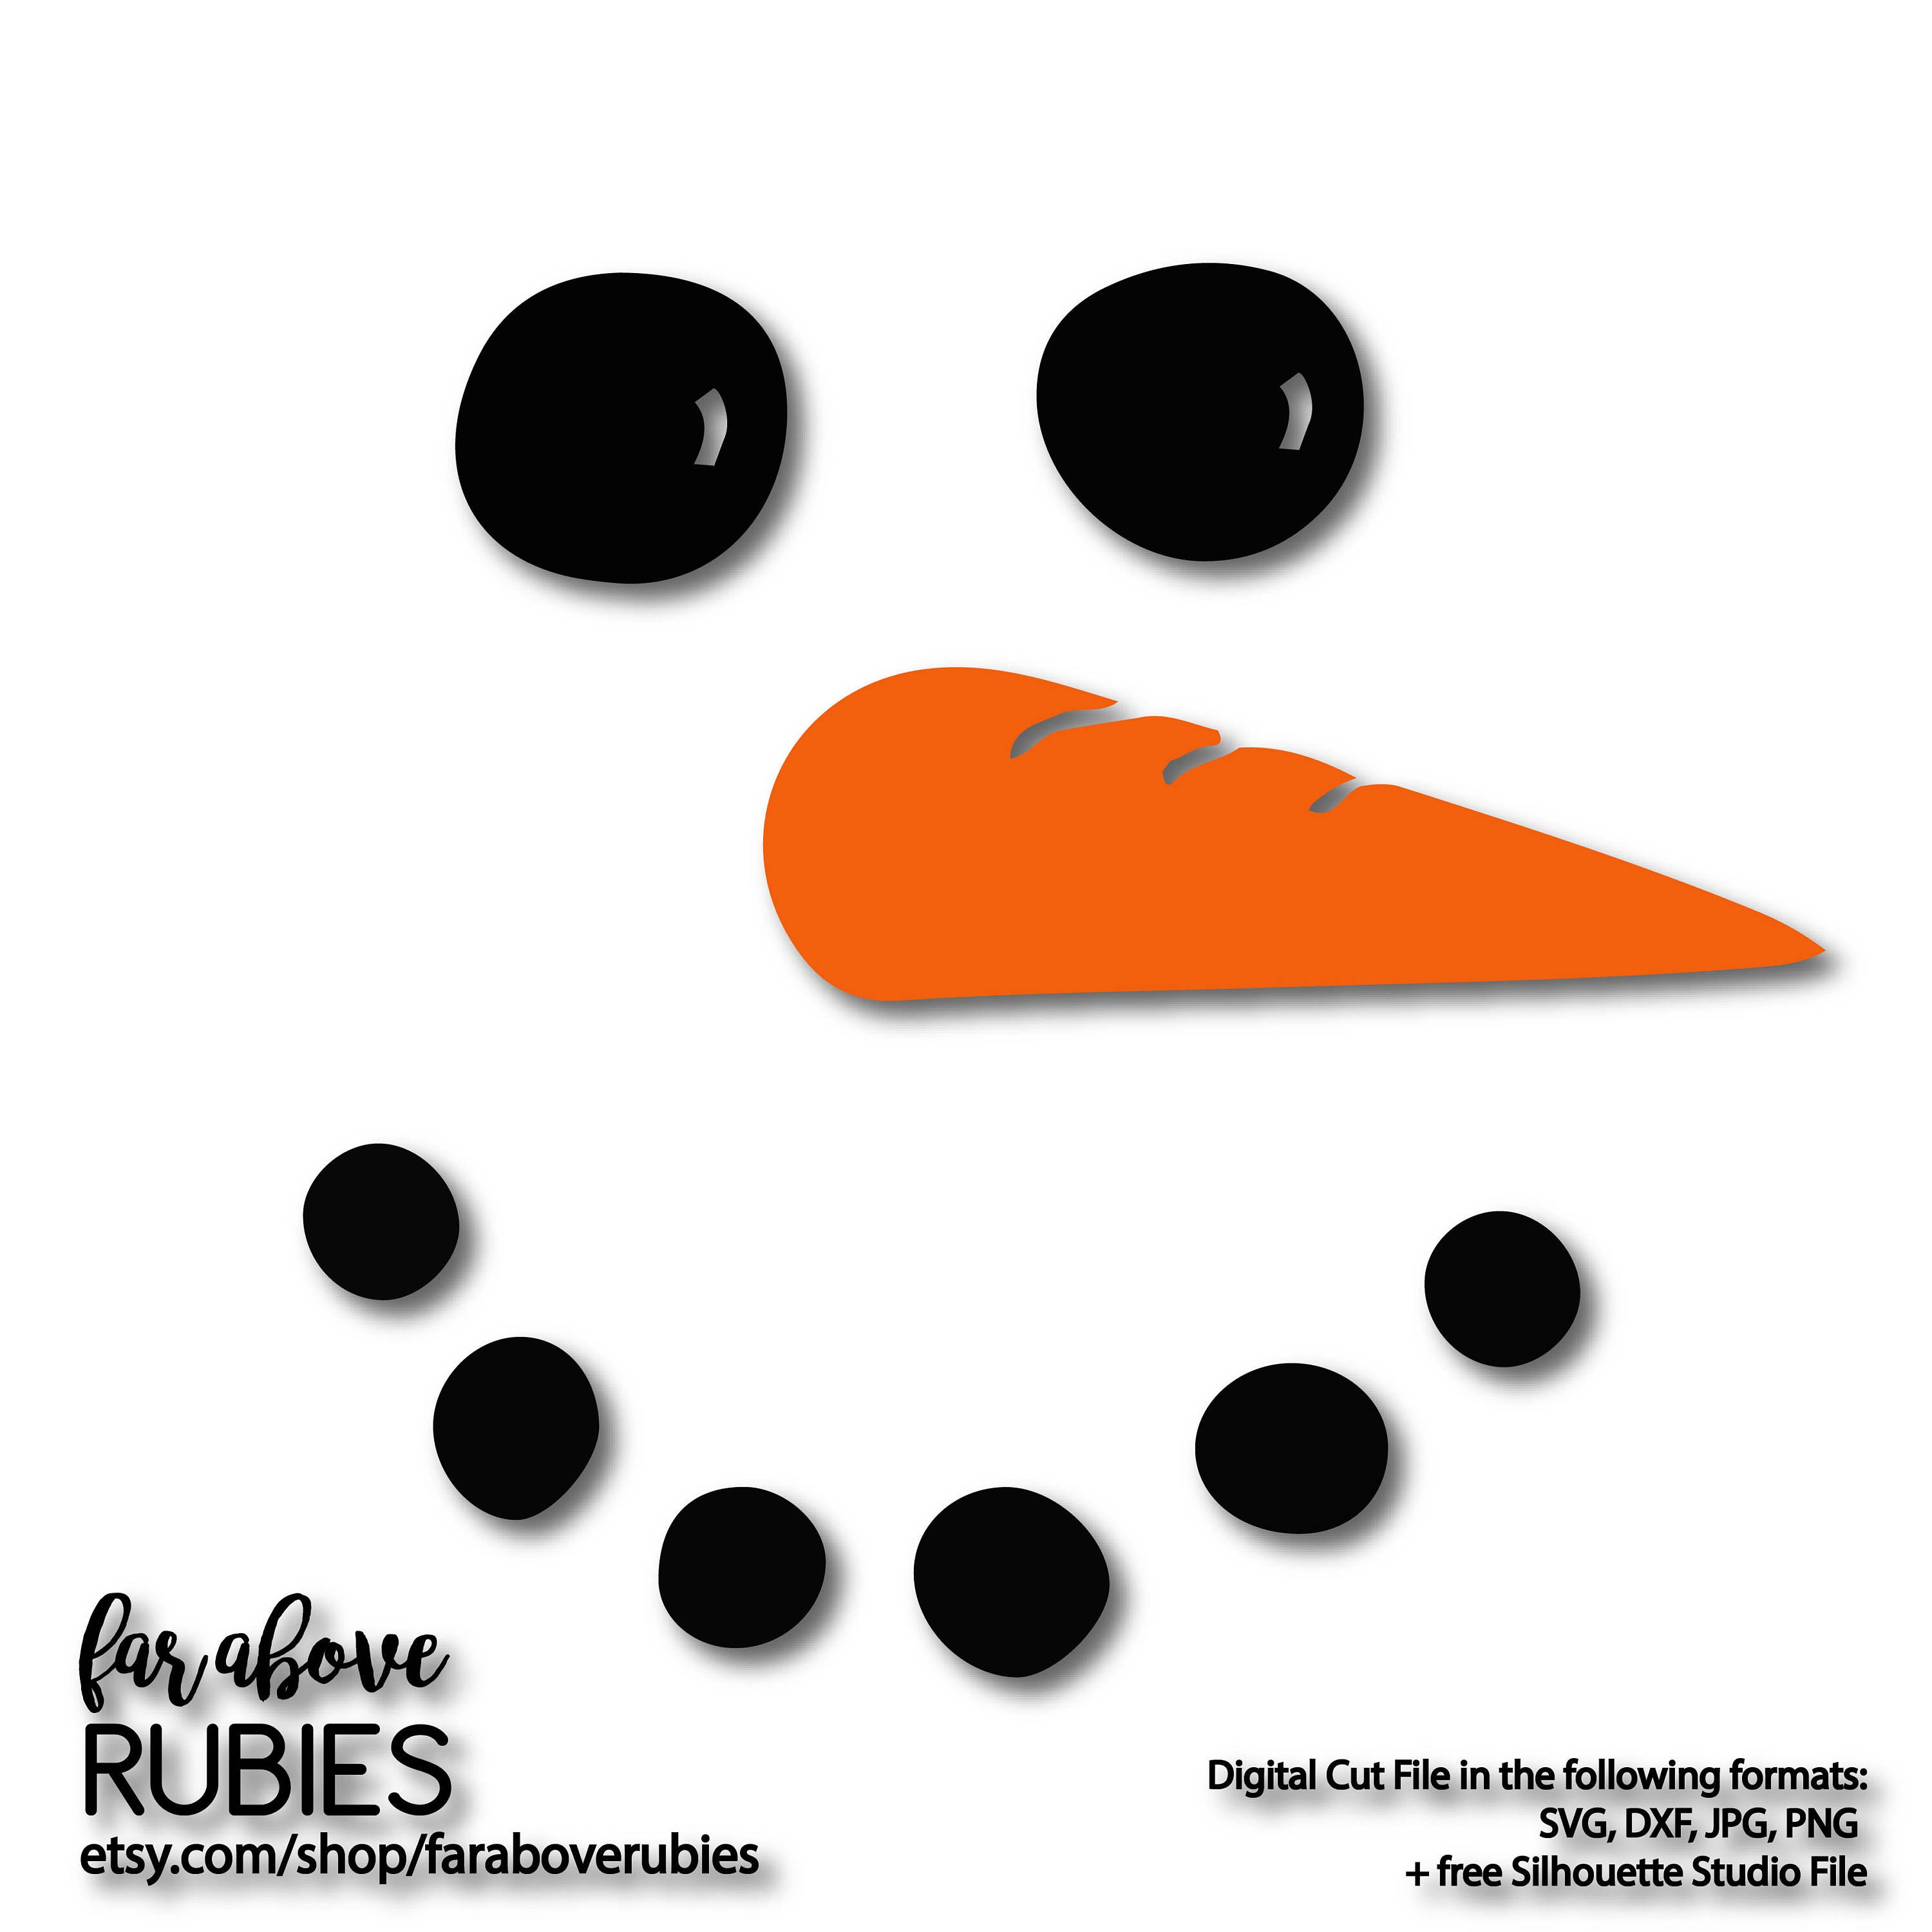 Snowman Face with Carrot Nose SVG EPS dxf png jpg digital